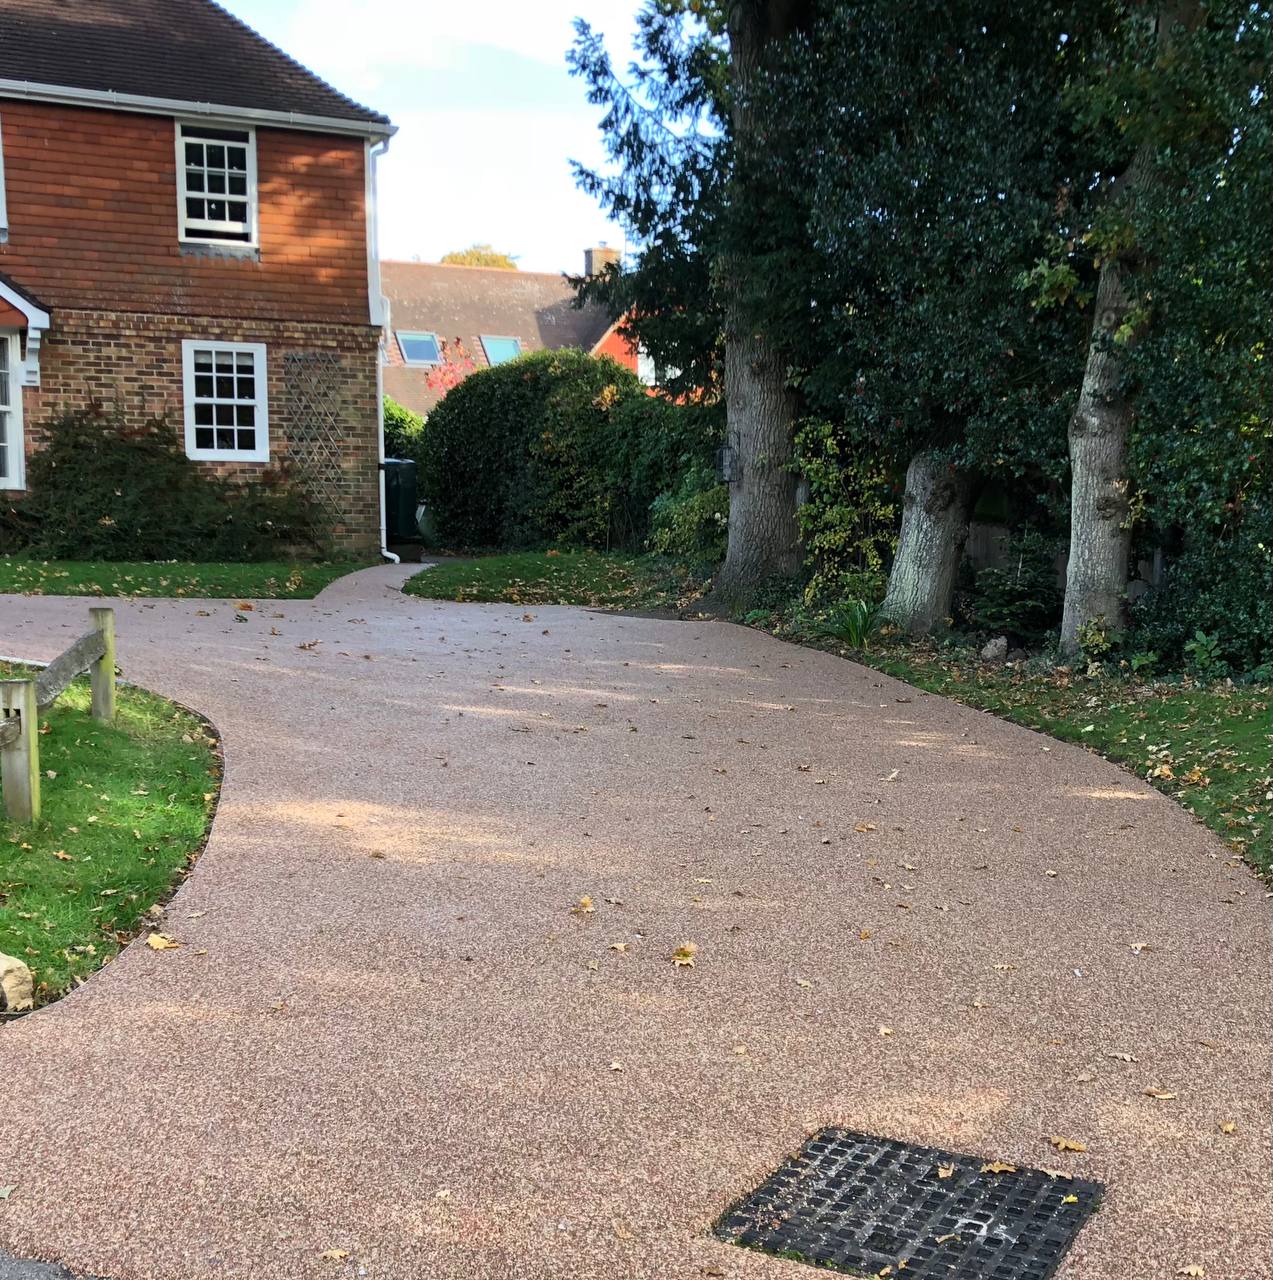 This is a photo of a Resin bound driveway carried out in a district of Newport. All works done by Resin Driveways Newport